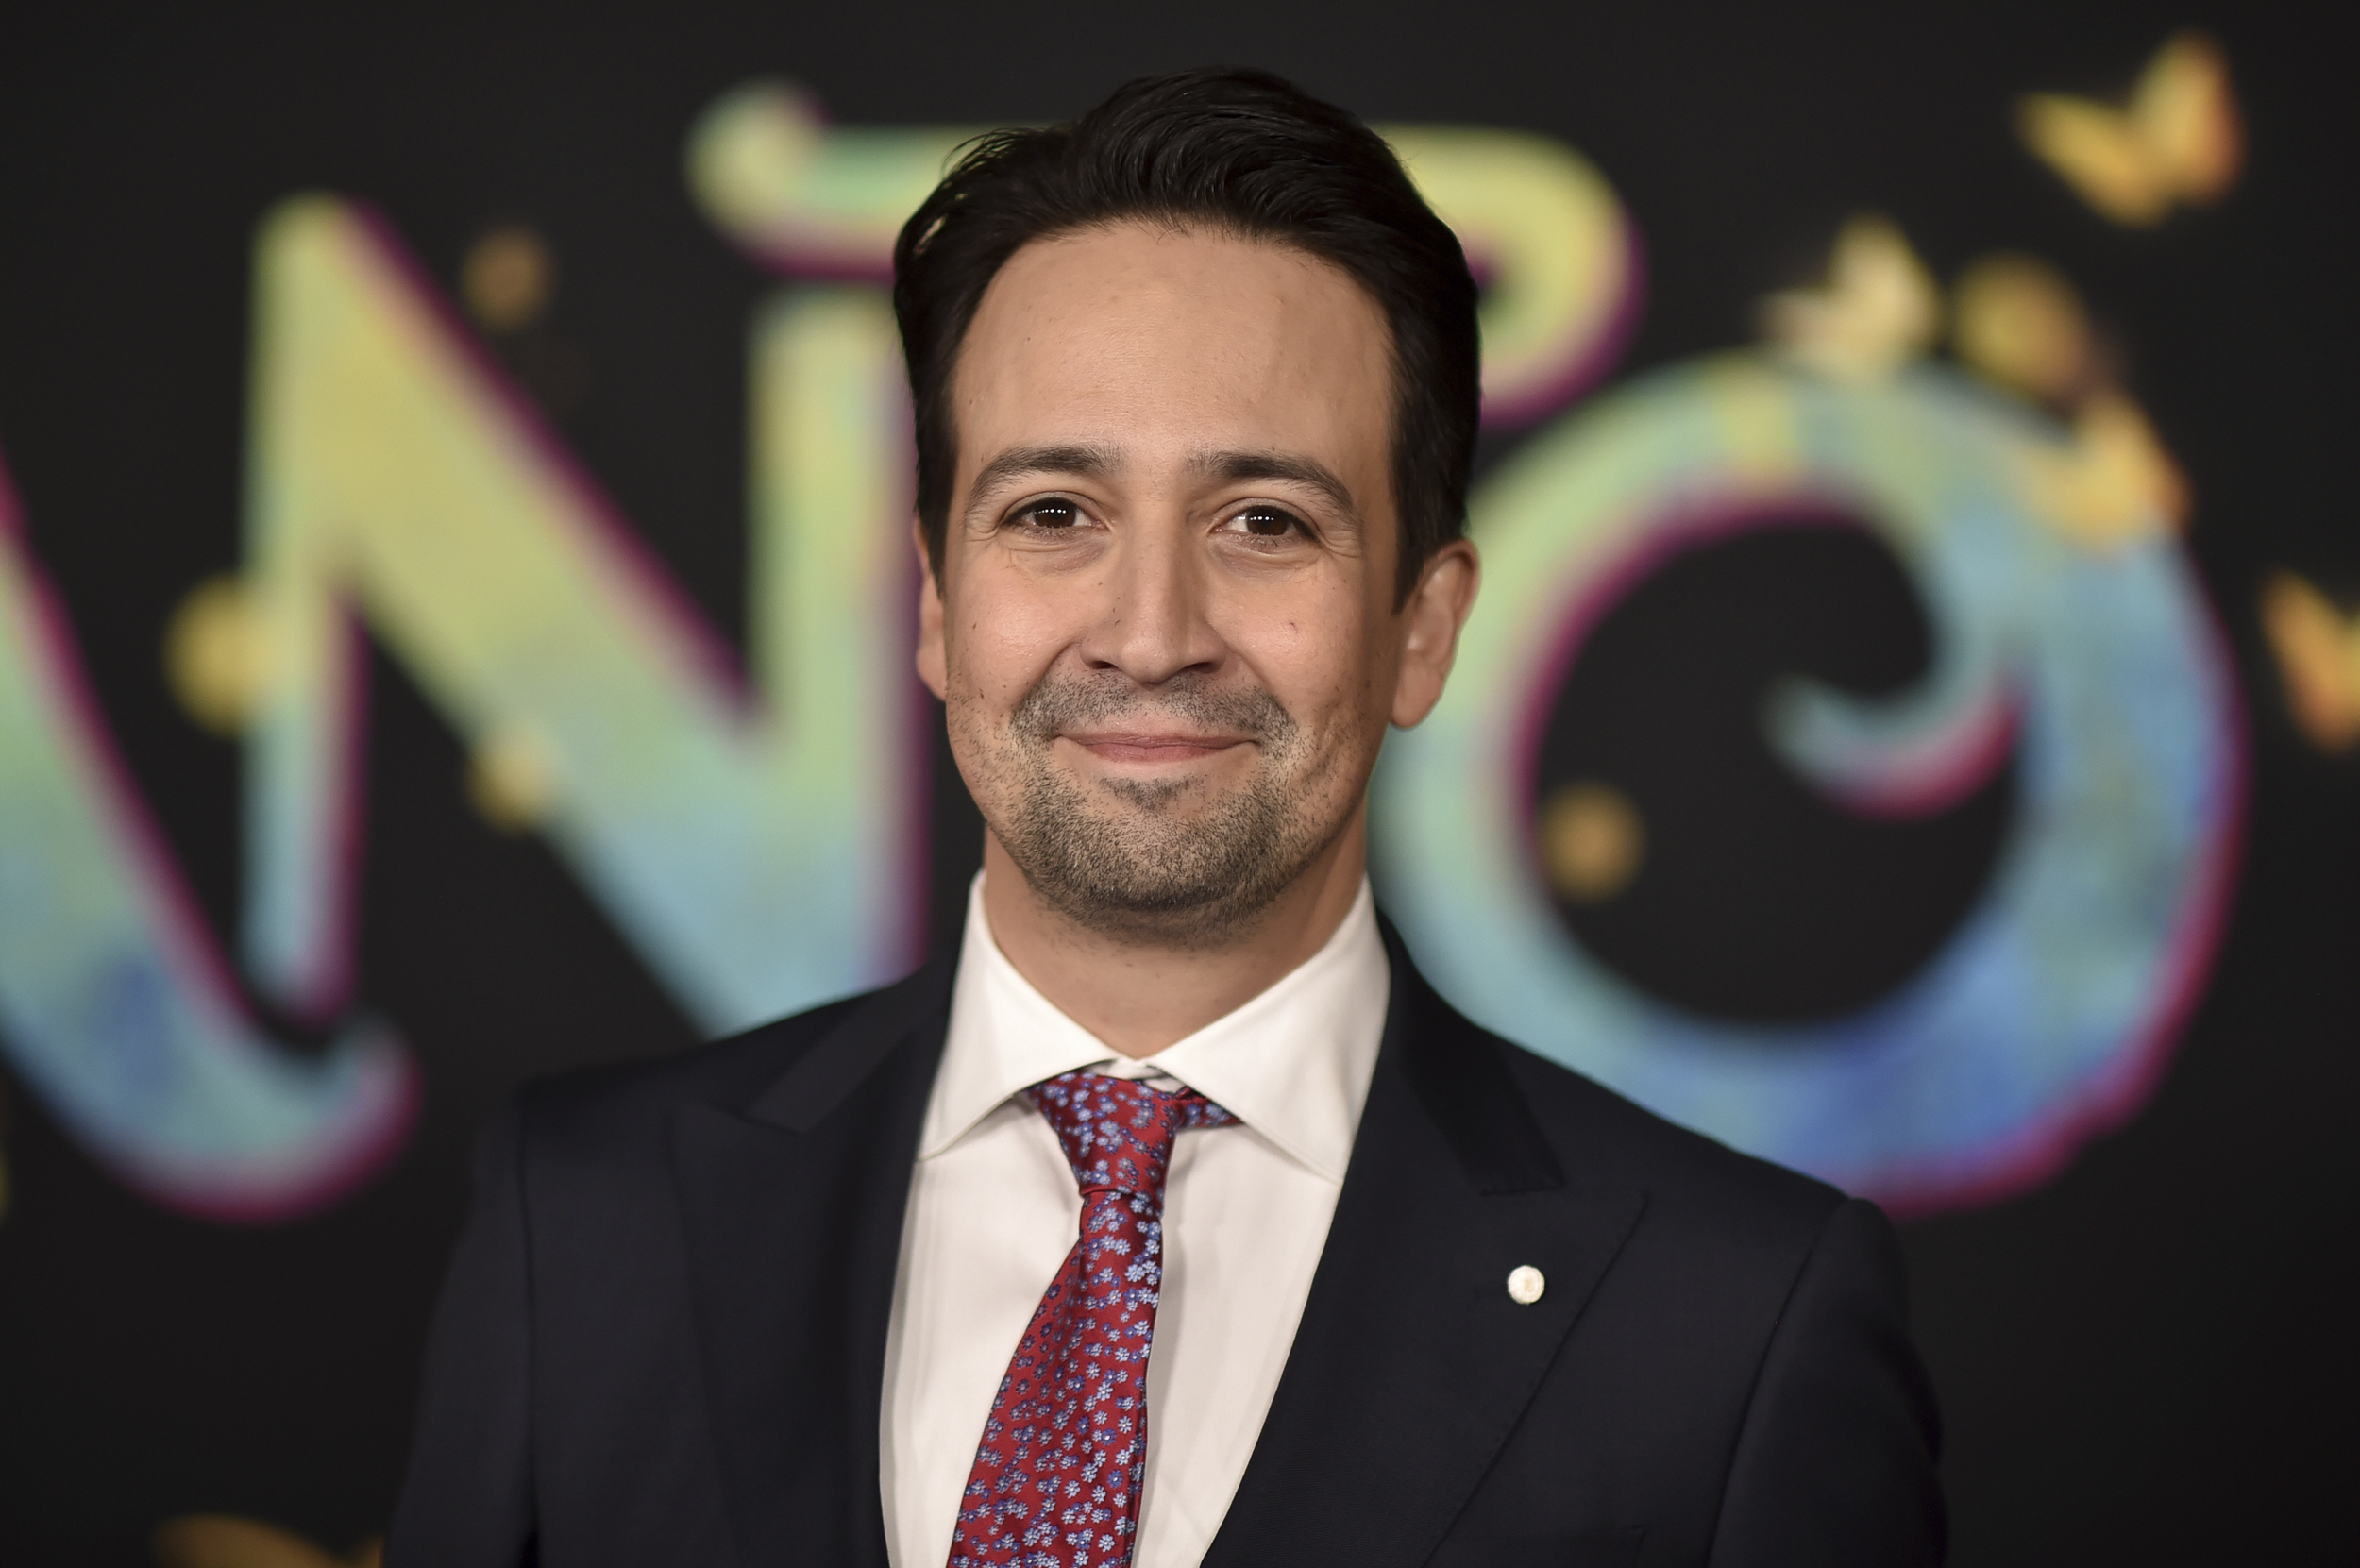 Lin-Manuel Miranda arrives at the premiere of "Encanto" on Wednesday, Nov. 3, 2021, at the El Capitan Theatre in Los Angeles. (Photo by Richard Shotwell/Invision/AP)